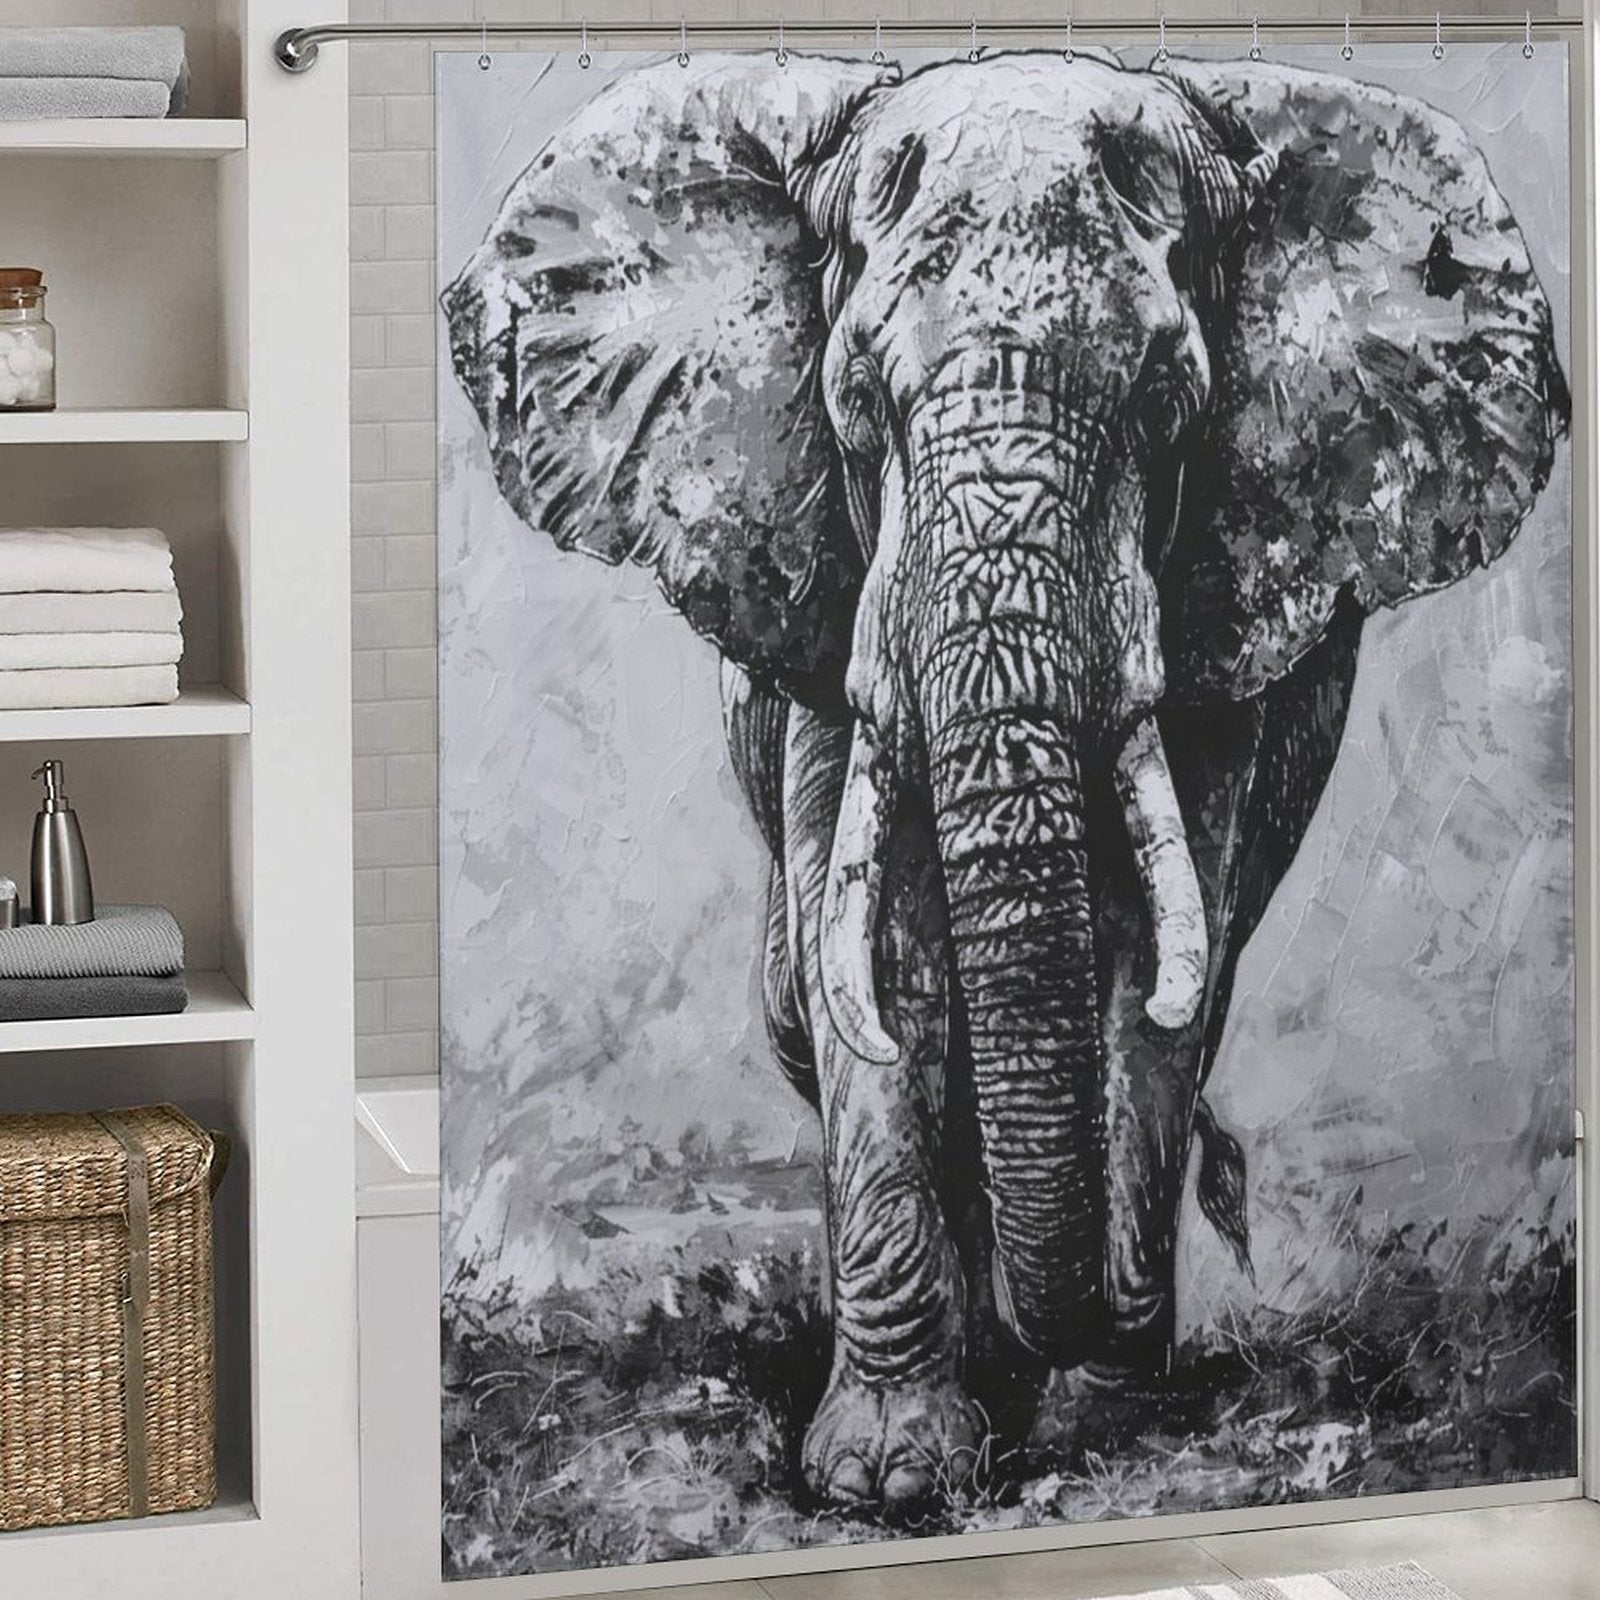 A bathroom with shelves on the left holding towels and toiletries, and an elegant Black and White Elephant Shower Curtain-Cottoncat by Cotton Cat, adding a touch of sophistication to the decor.